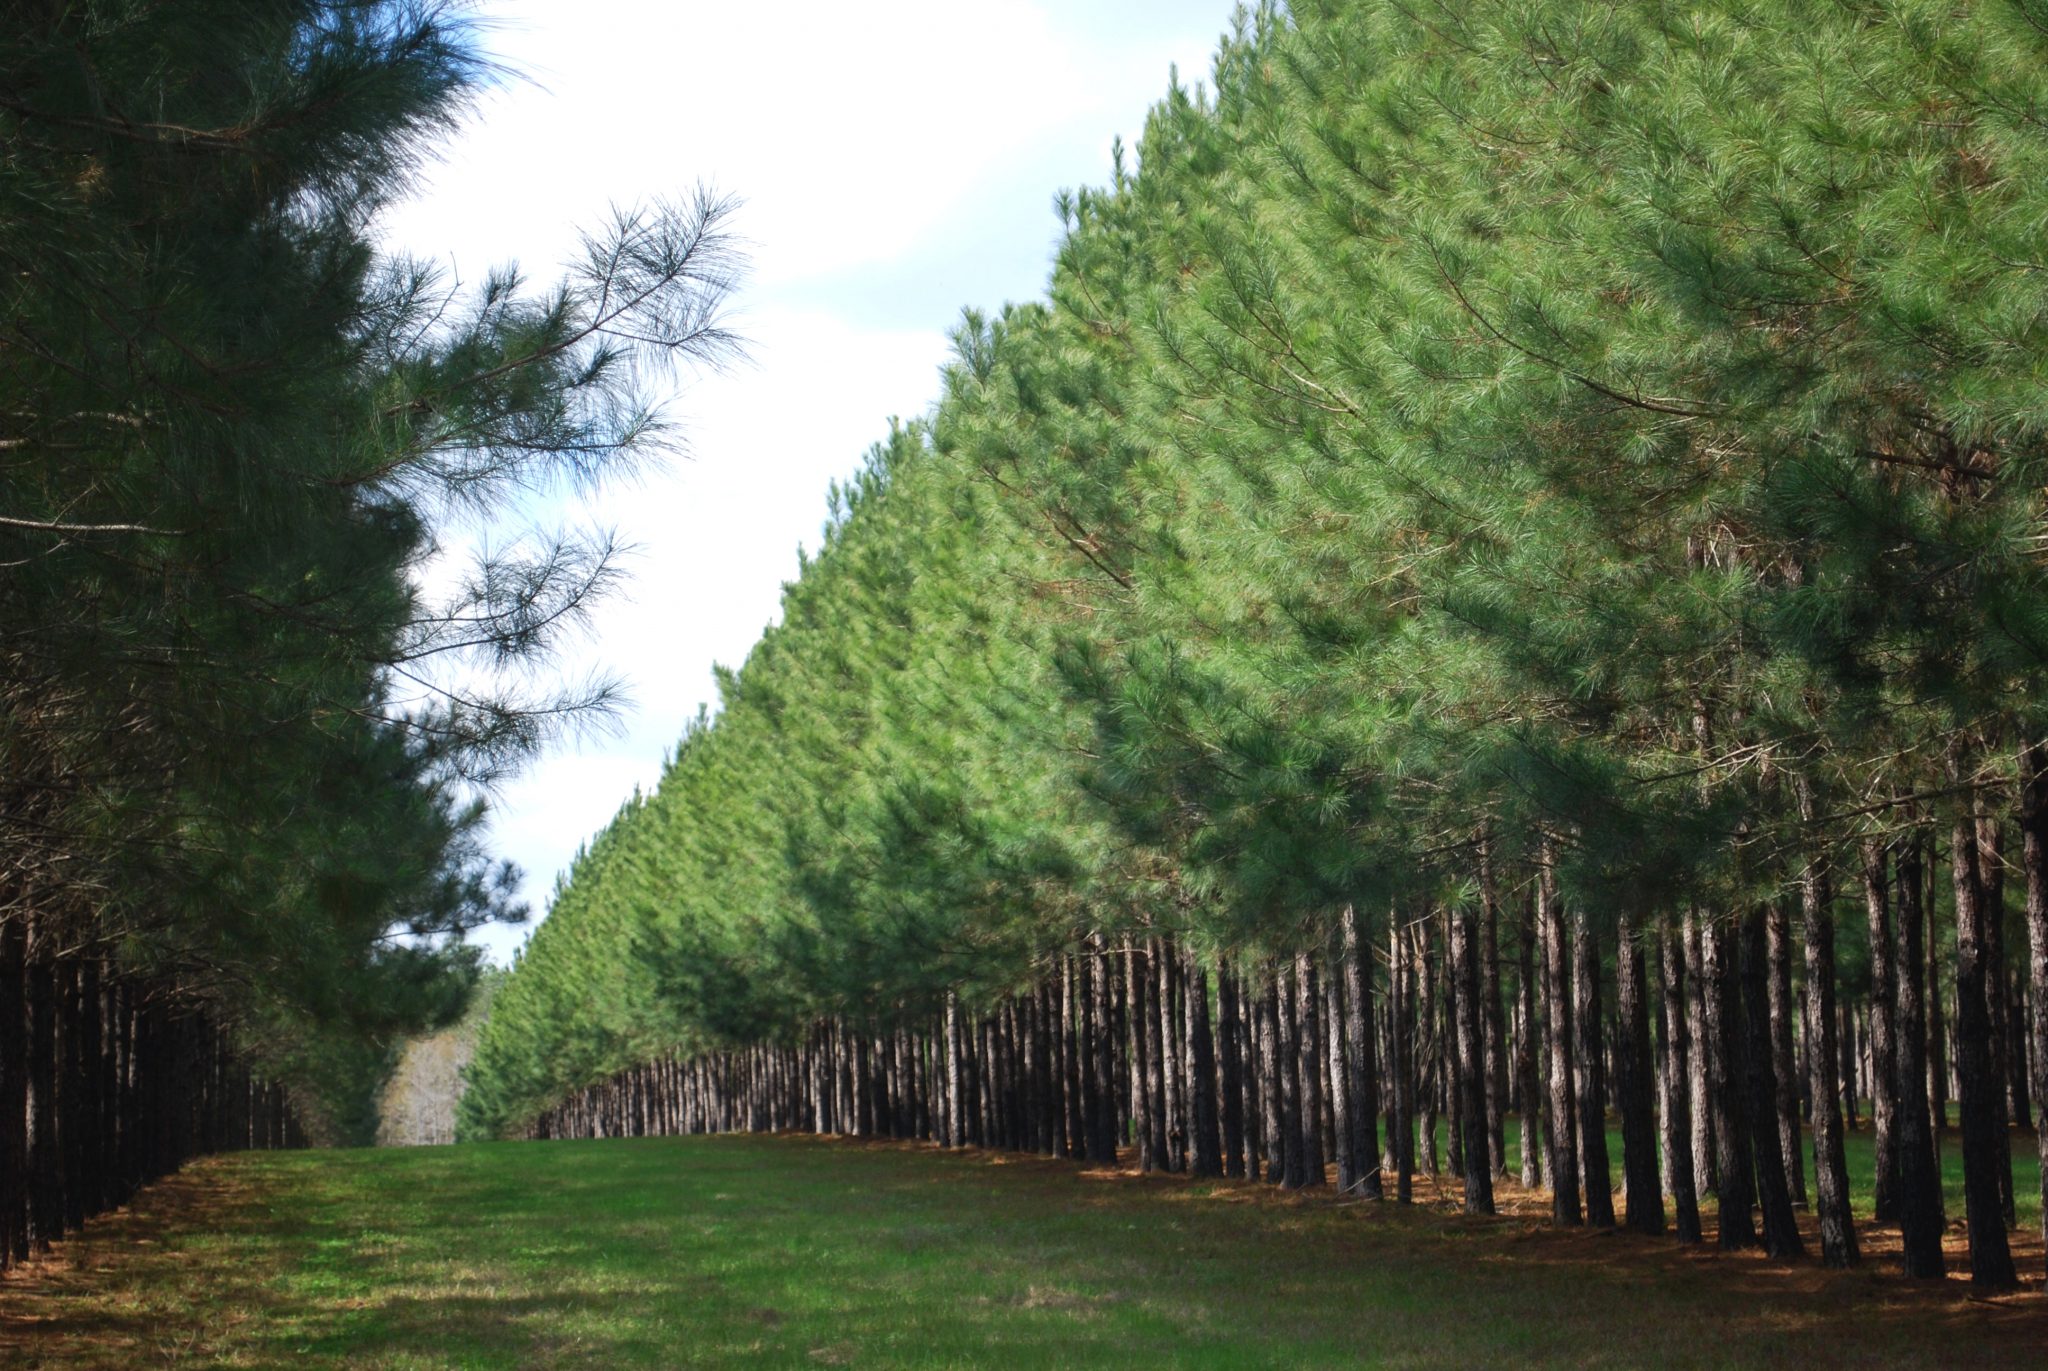 Pine trees planted in rows with large spaces between for livestock grazing.